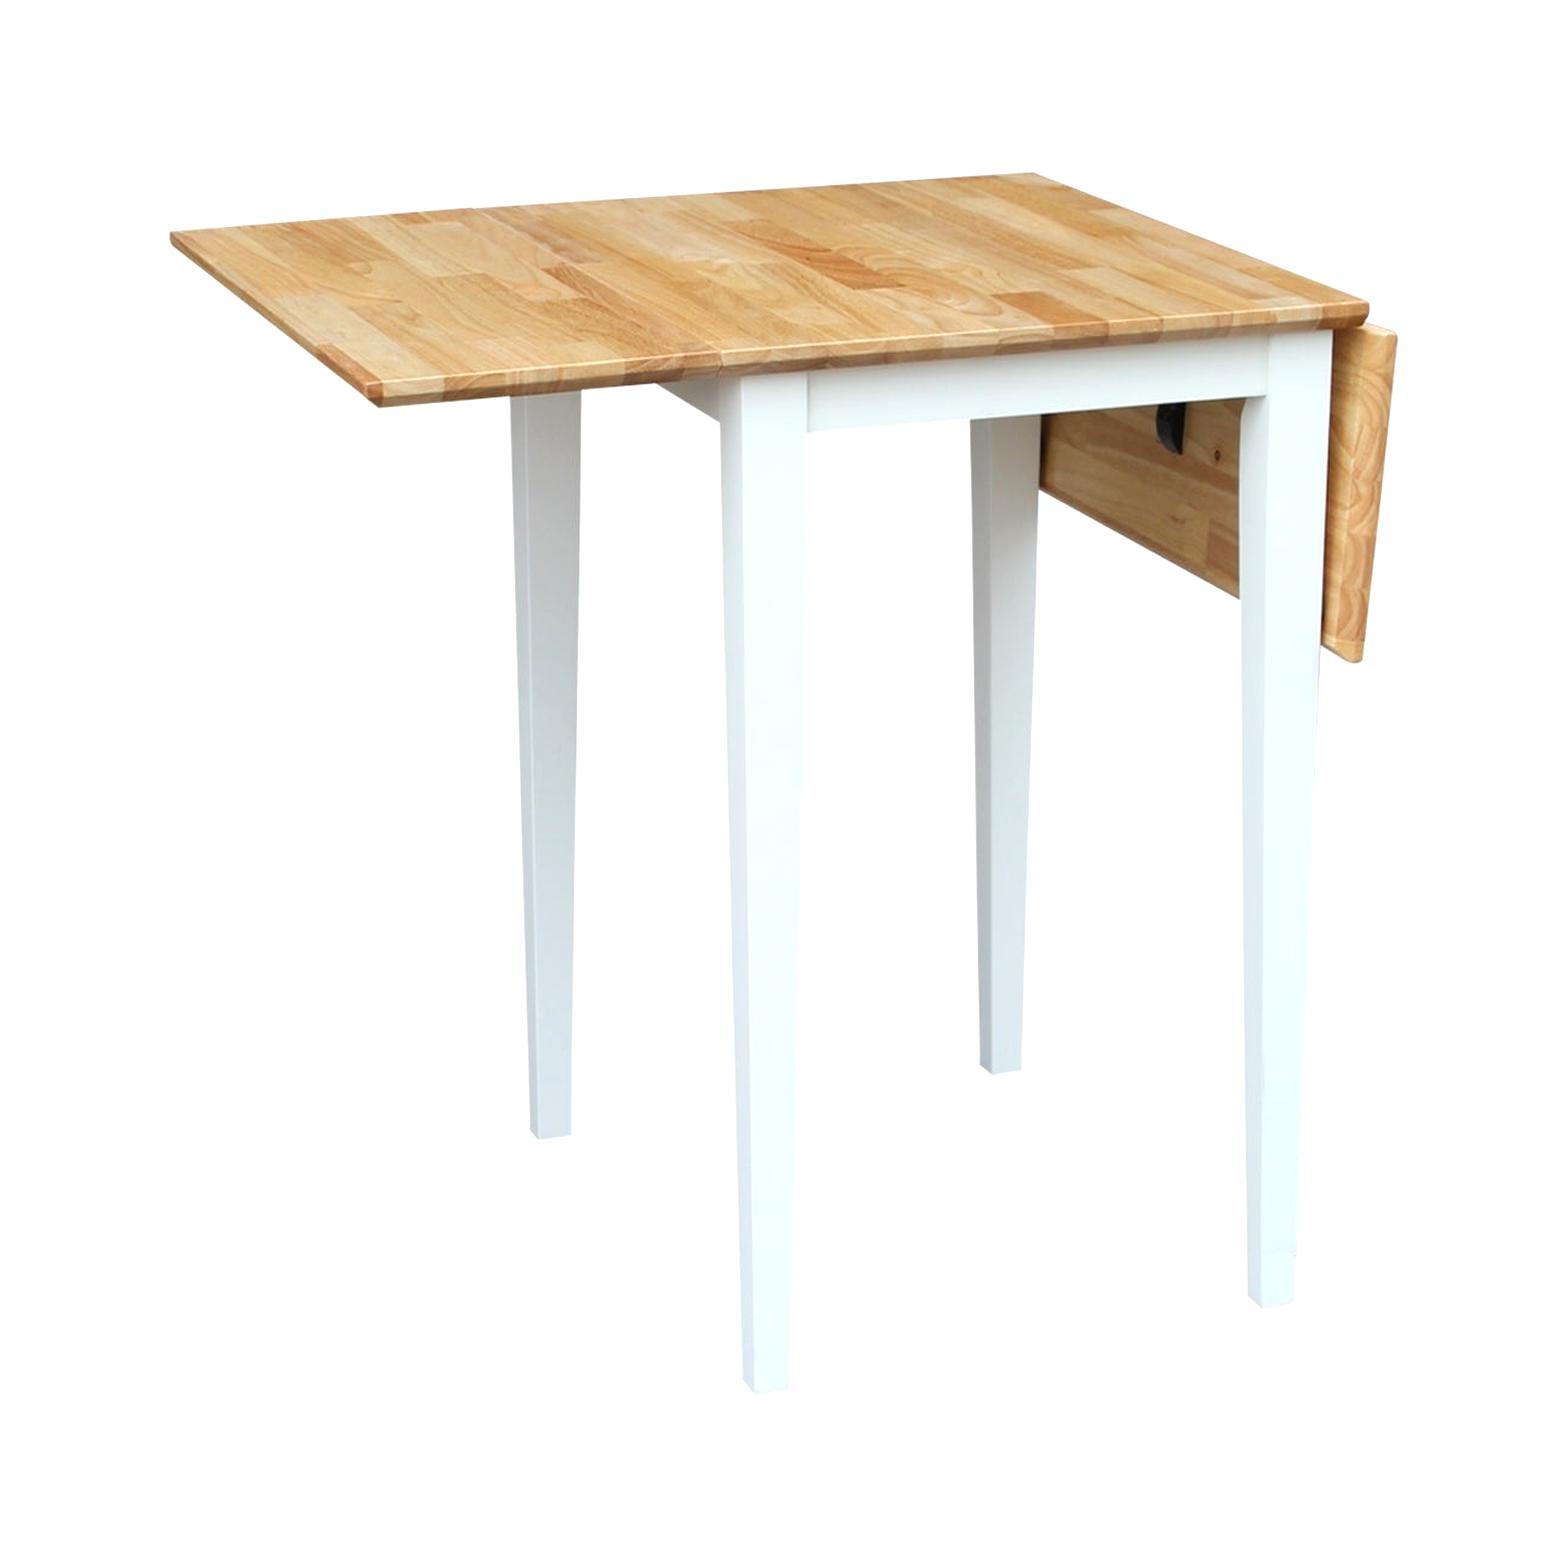 Featured image of post Small Drop Leaf Table Uk : For more information about this table and other furniture made by richard.